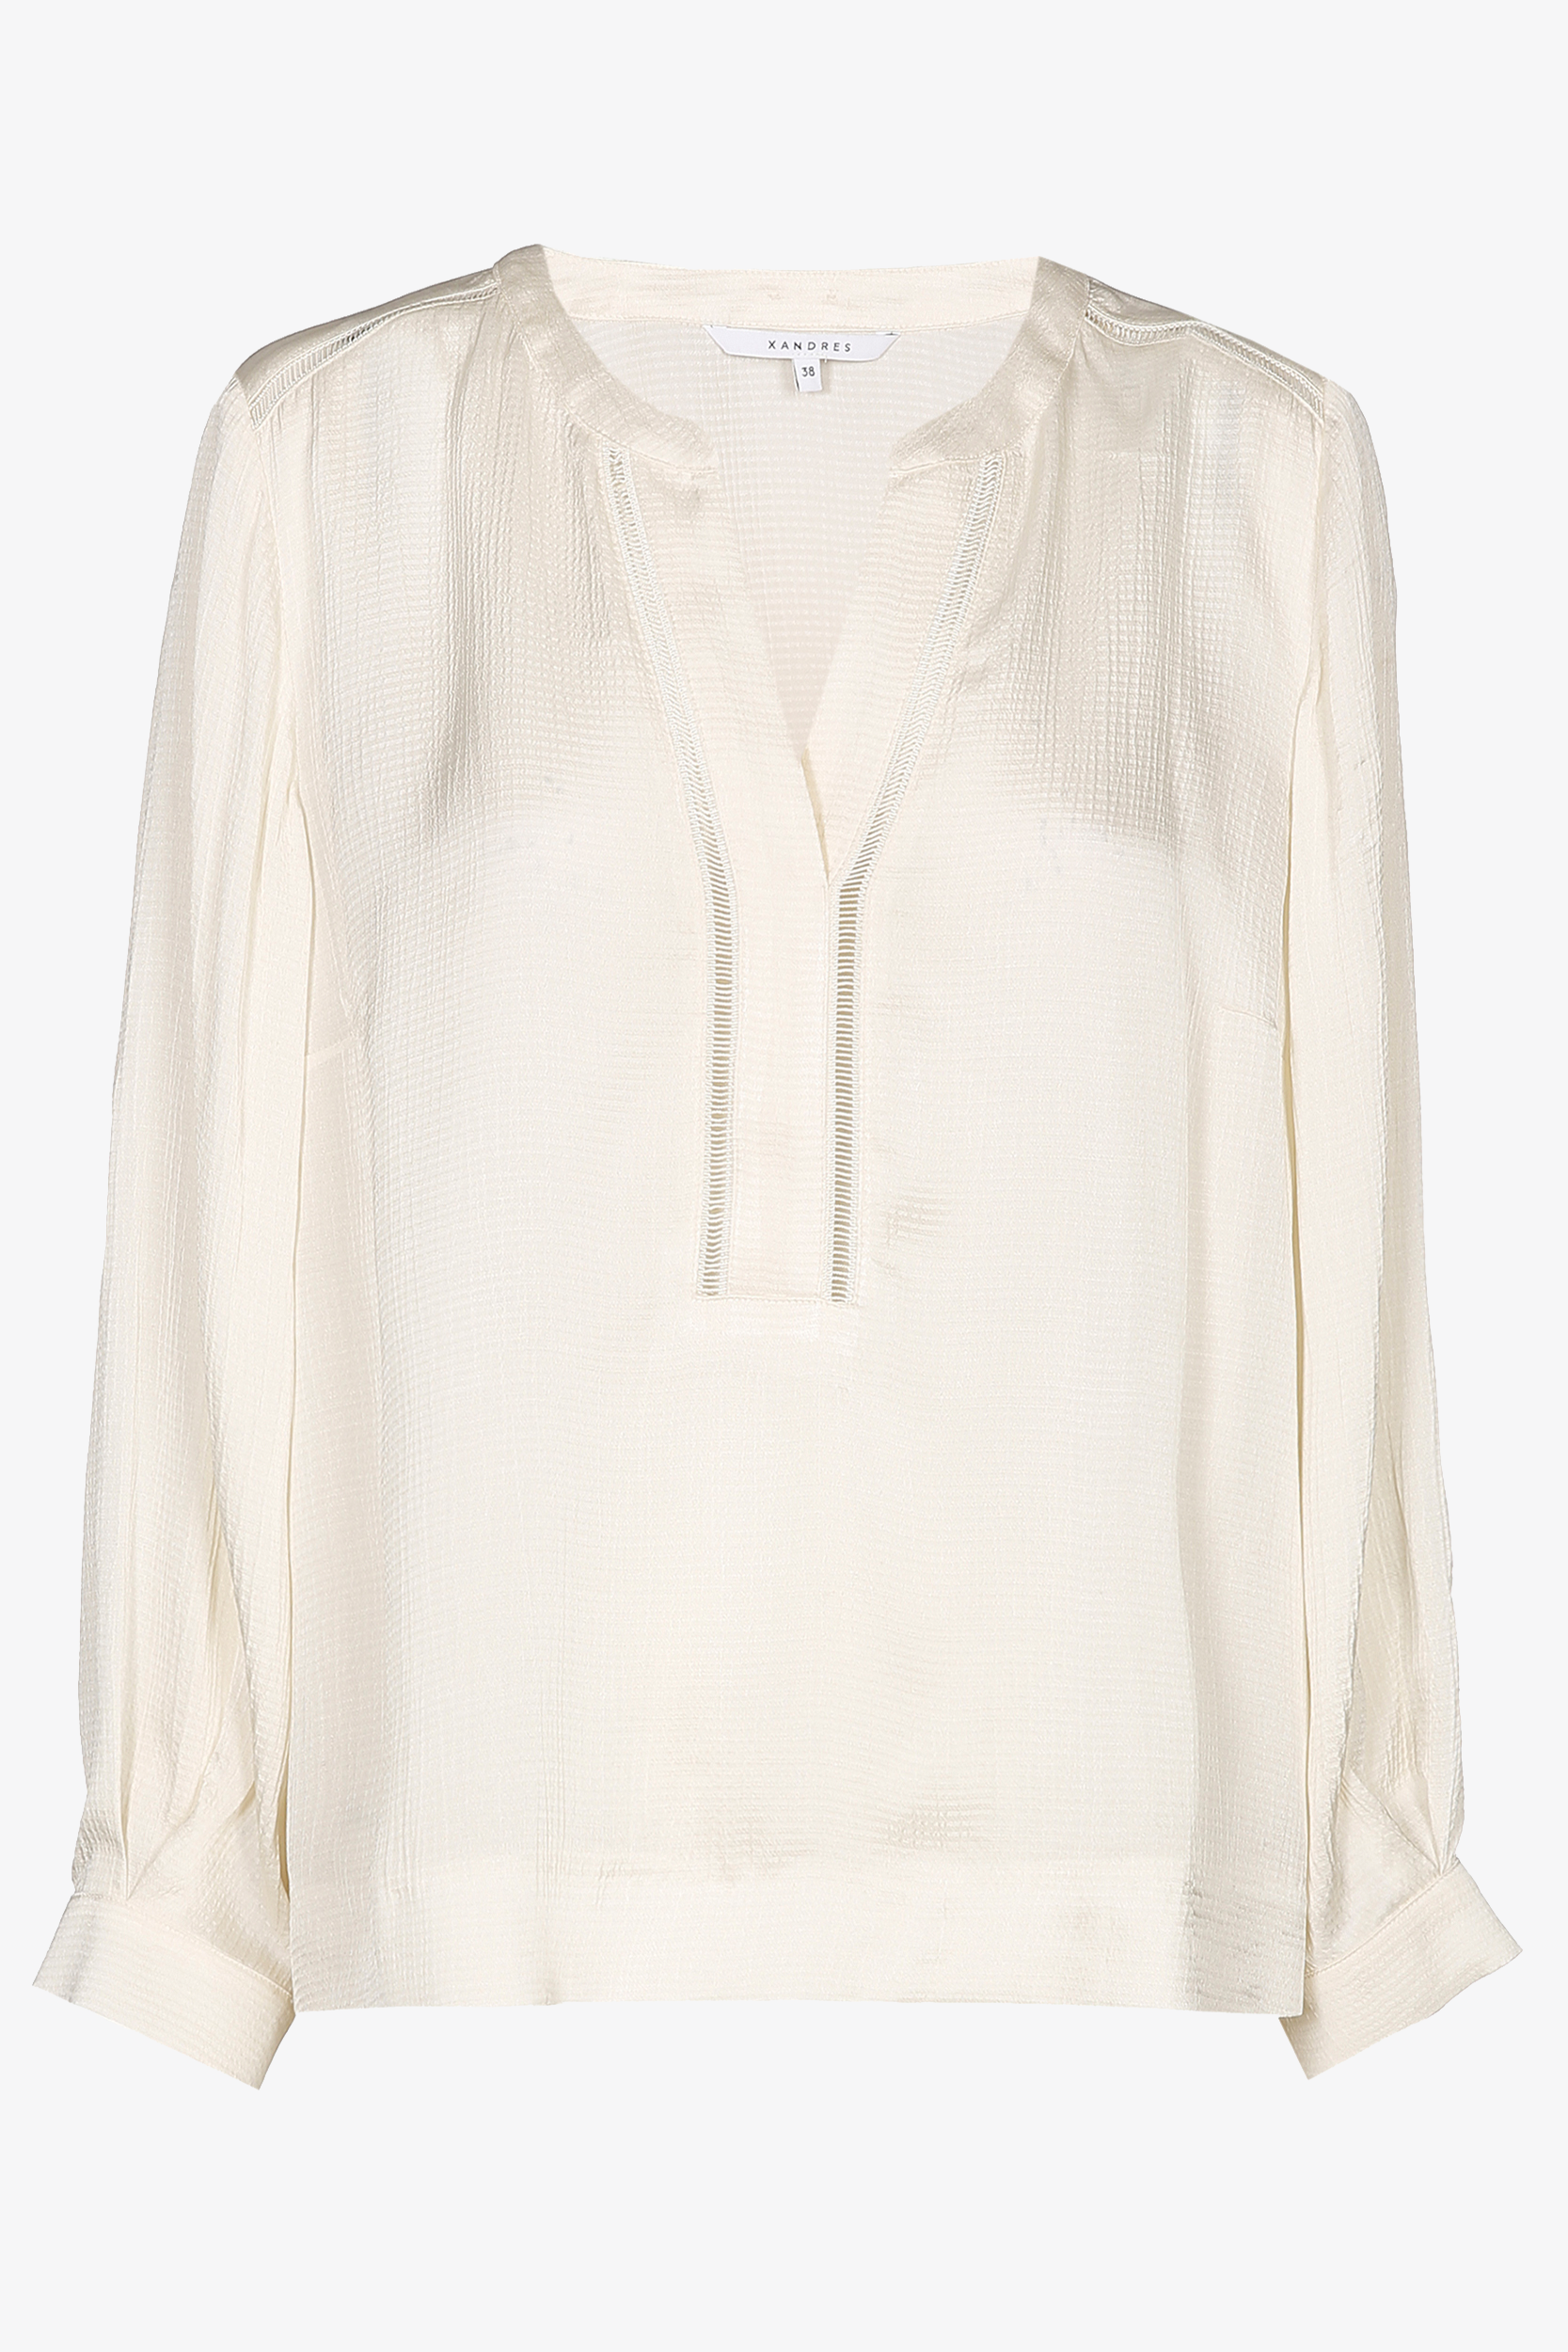 Summery blouse with V-neck